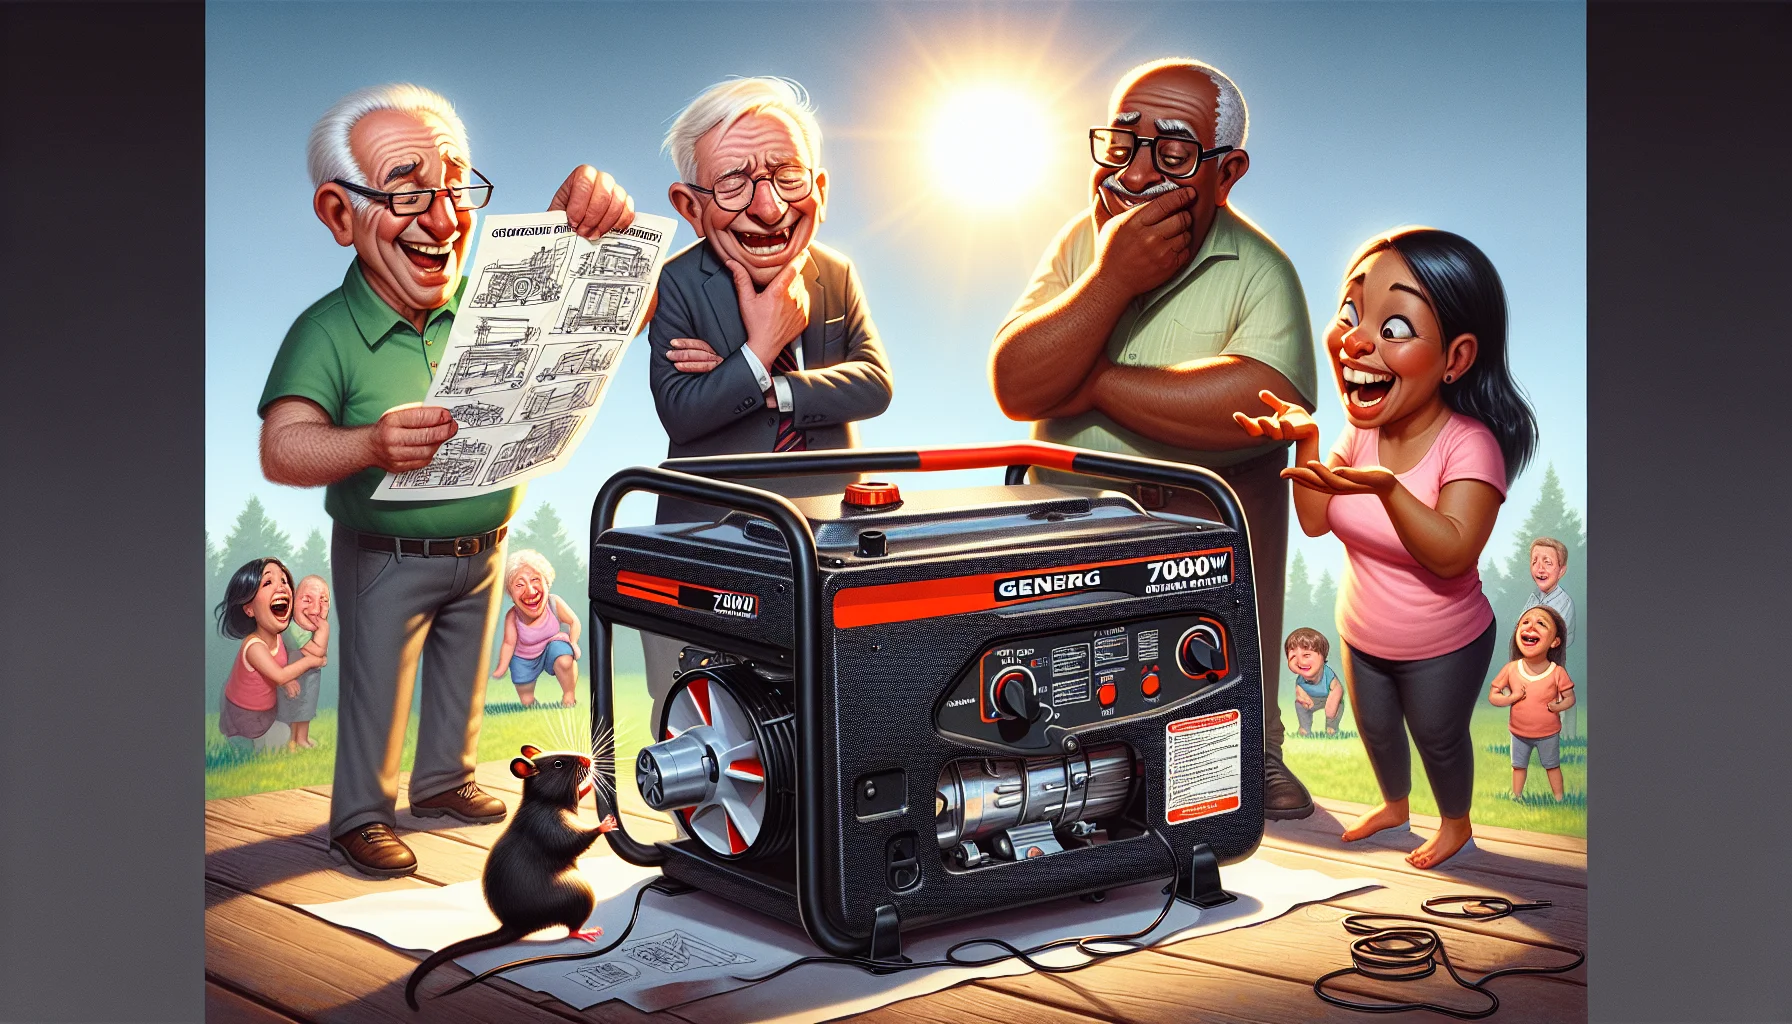 Depict a humorous scene of a generic black and red 7000-watt portable generator surrounded by a diverse group of people. Three older males, a Caucasian with a jovial expression, a South Asian with a puzzled look, and a Middle Eastern wearing glasses, are scrutinizing a convoluted, homemade instruction manual. An African American woman and a Hispanic woman are laughing together as they compare the huge generator with a tiny hamster running on a wheel, pretending it's their alternative power source. The sun is shining in the background and everyone is having a good time, subtly encouraging the idea of generating your own electricity.